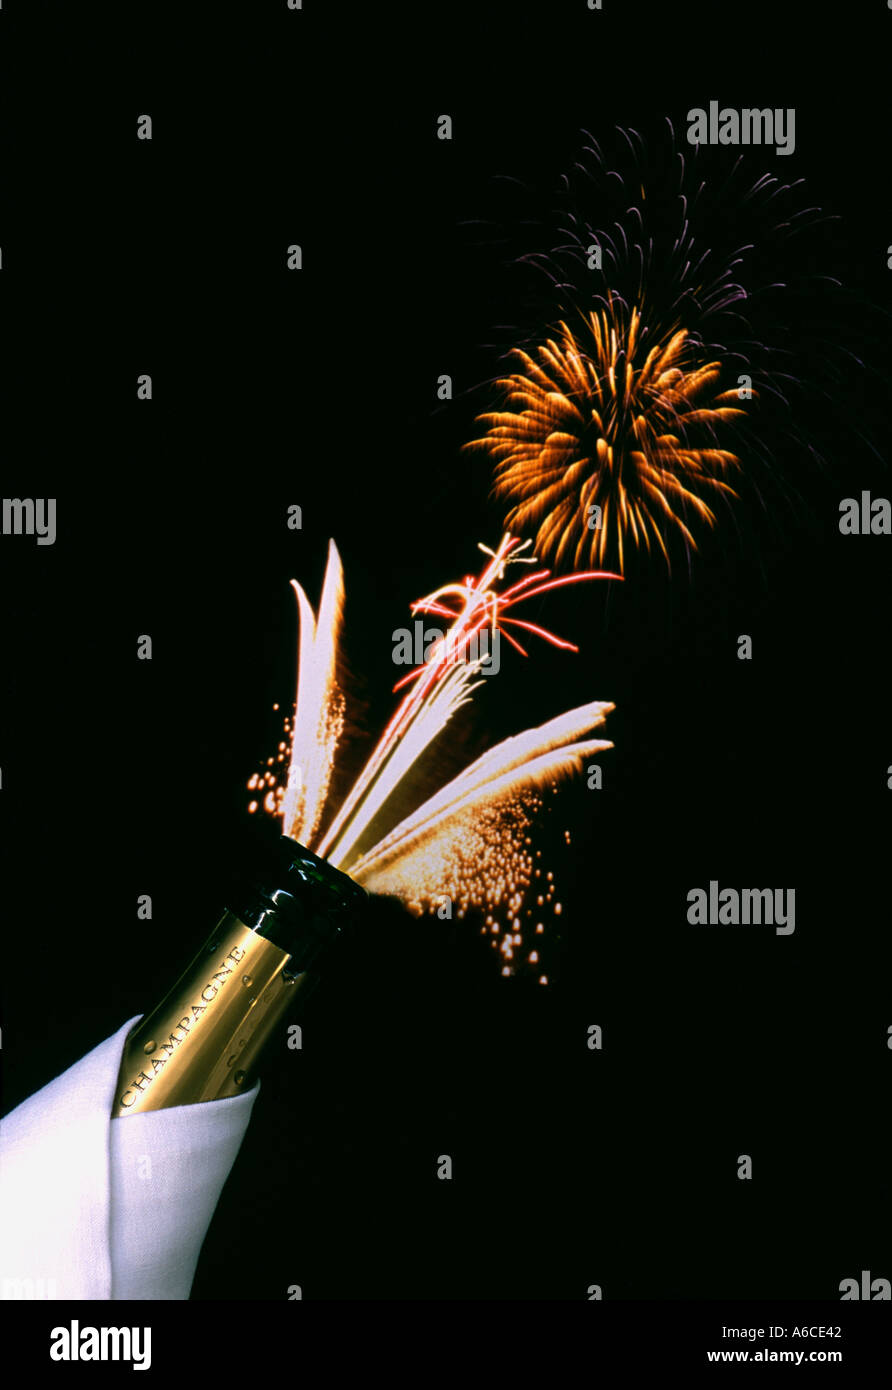 Champagne celebration fireworks appearing to come from bottle concept image Stock Photo